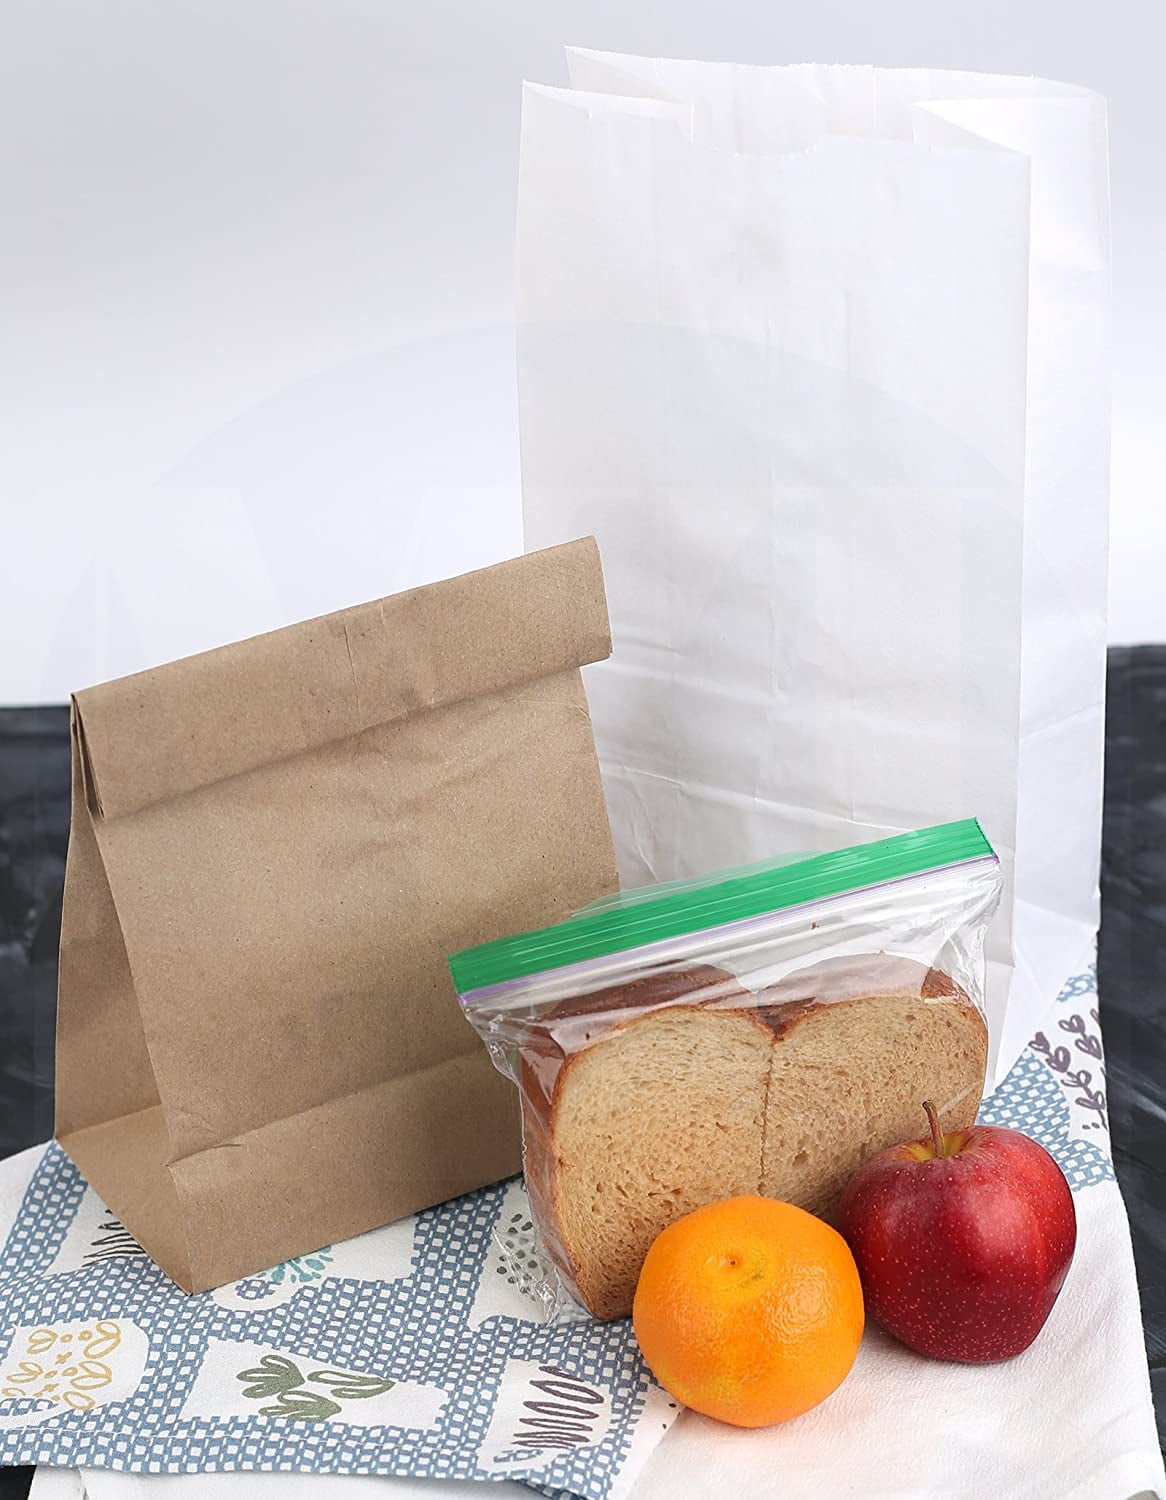 MT Products 3 lb Kraft White Paper Bag Keeps Food Fresh - Pack of 100, Adult Unisex, Size: 3 lbs